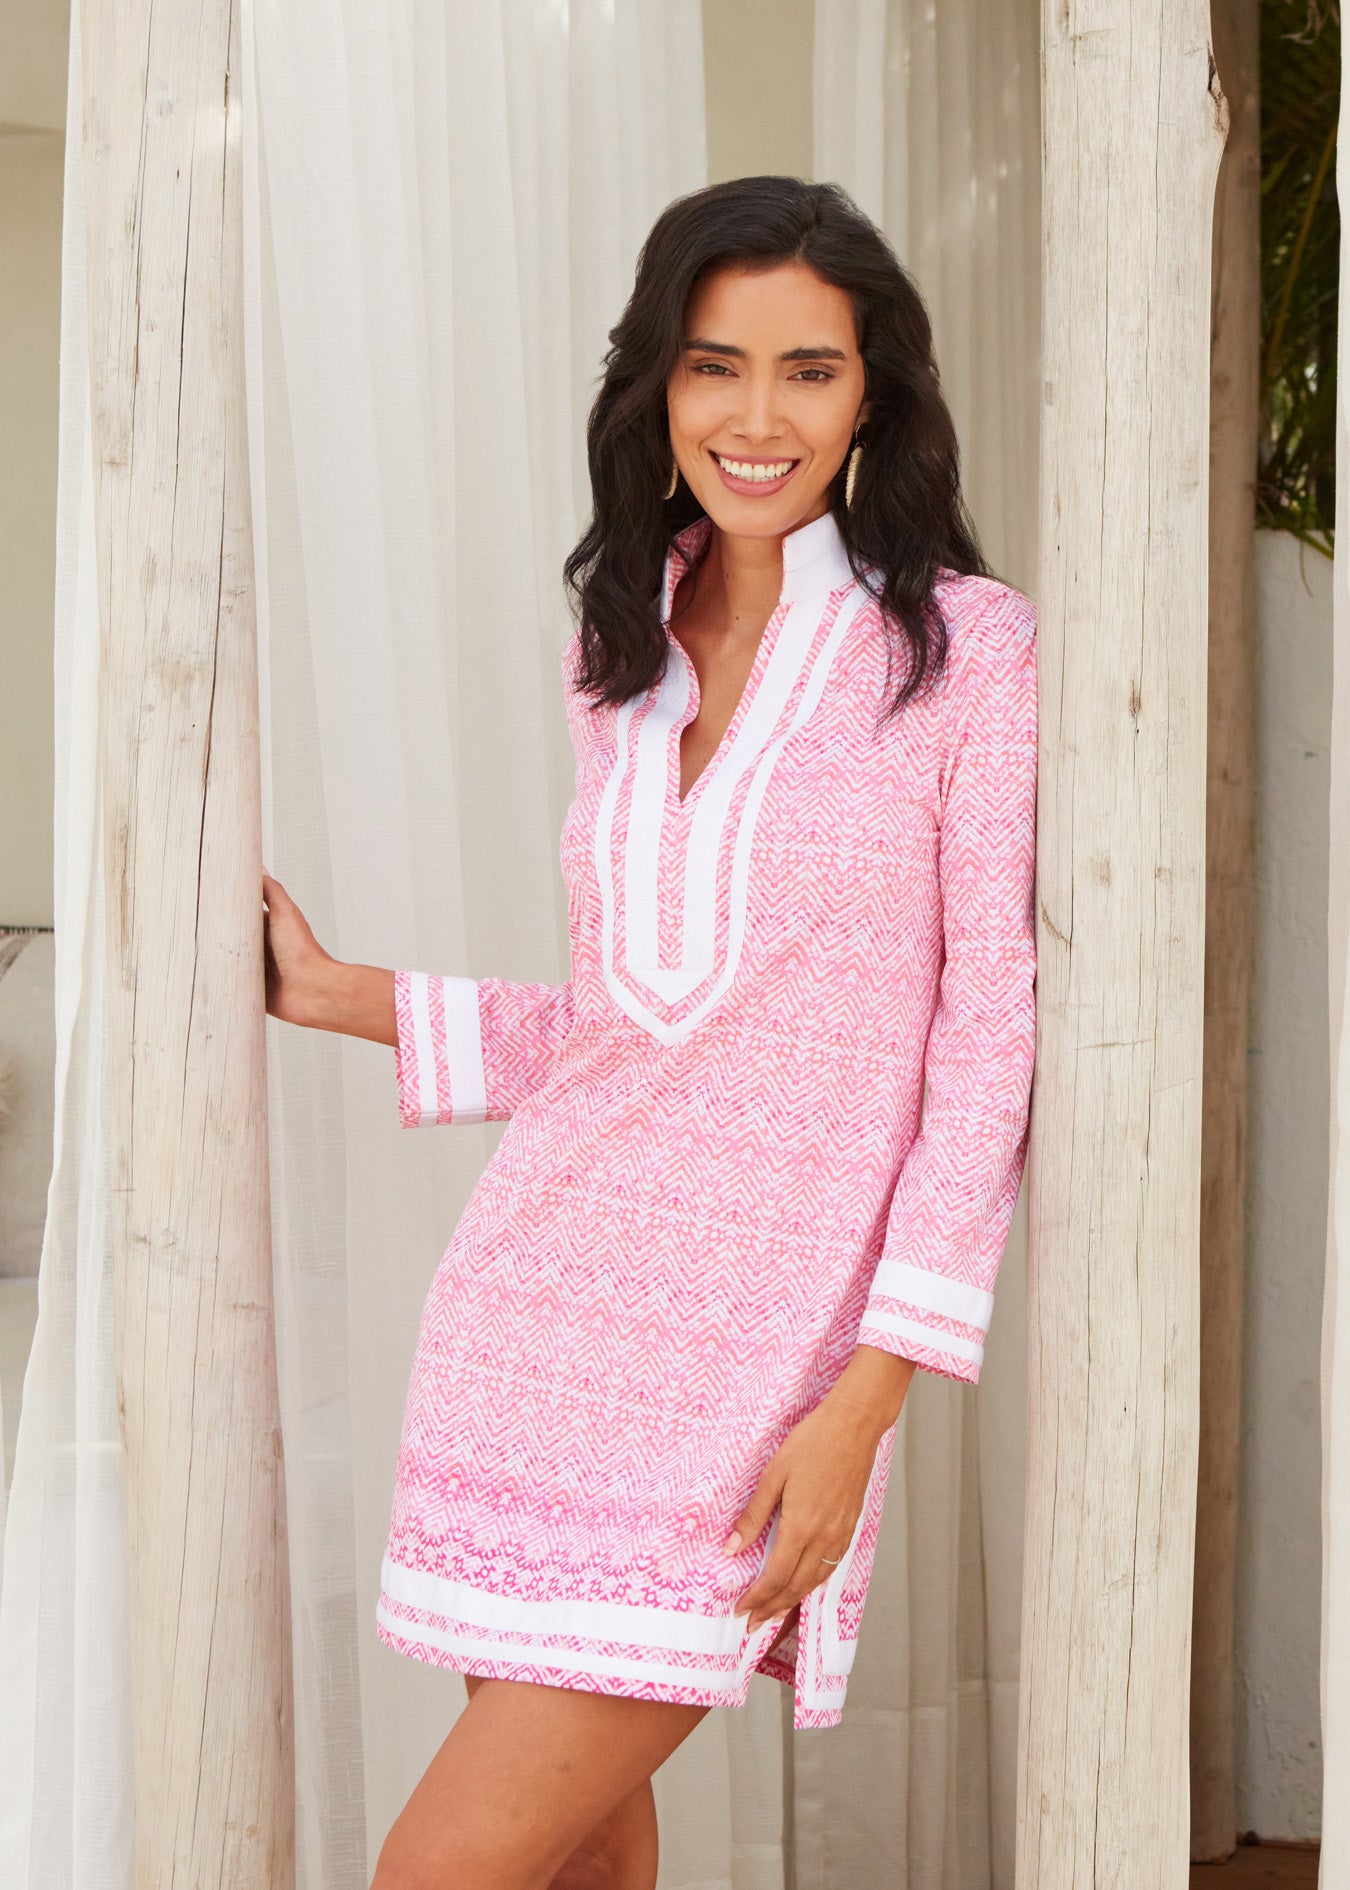 Dark haired woman leaning against wood pole wearing Algarve Tunic Dress.